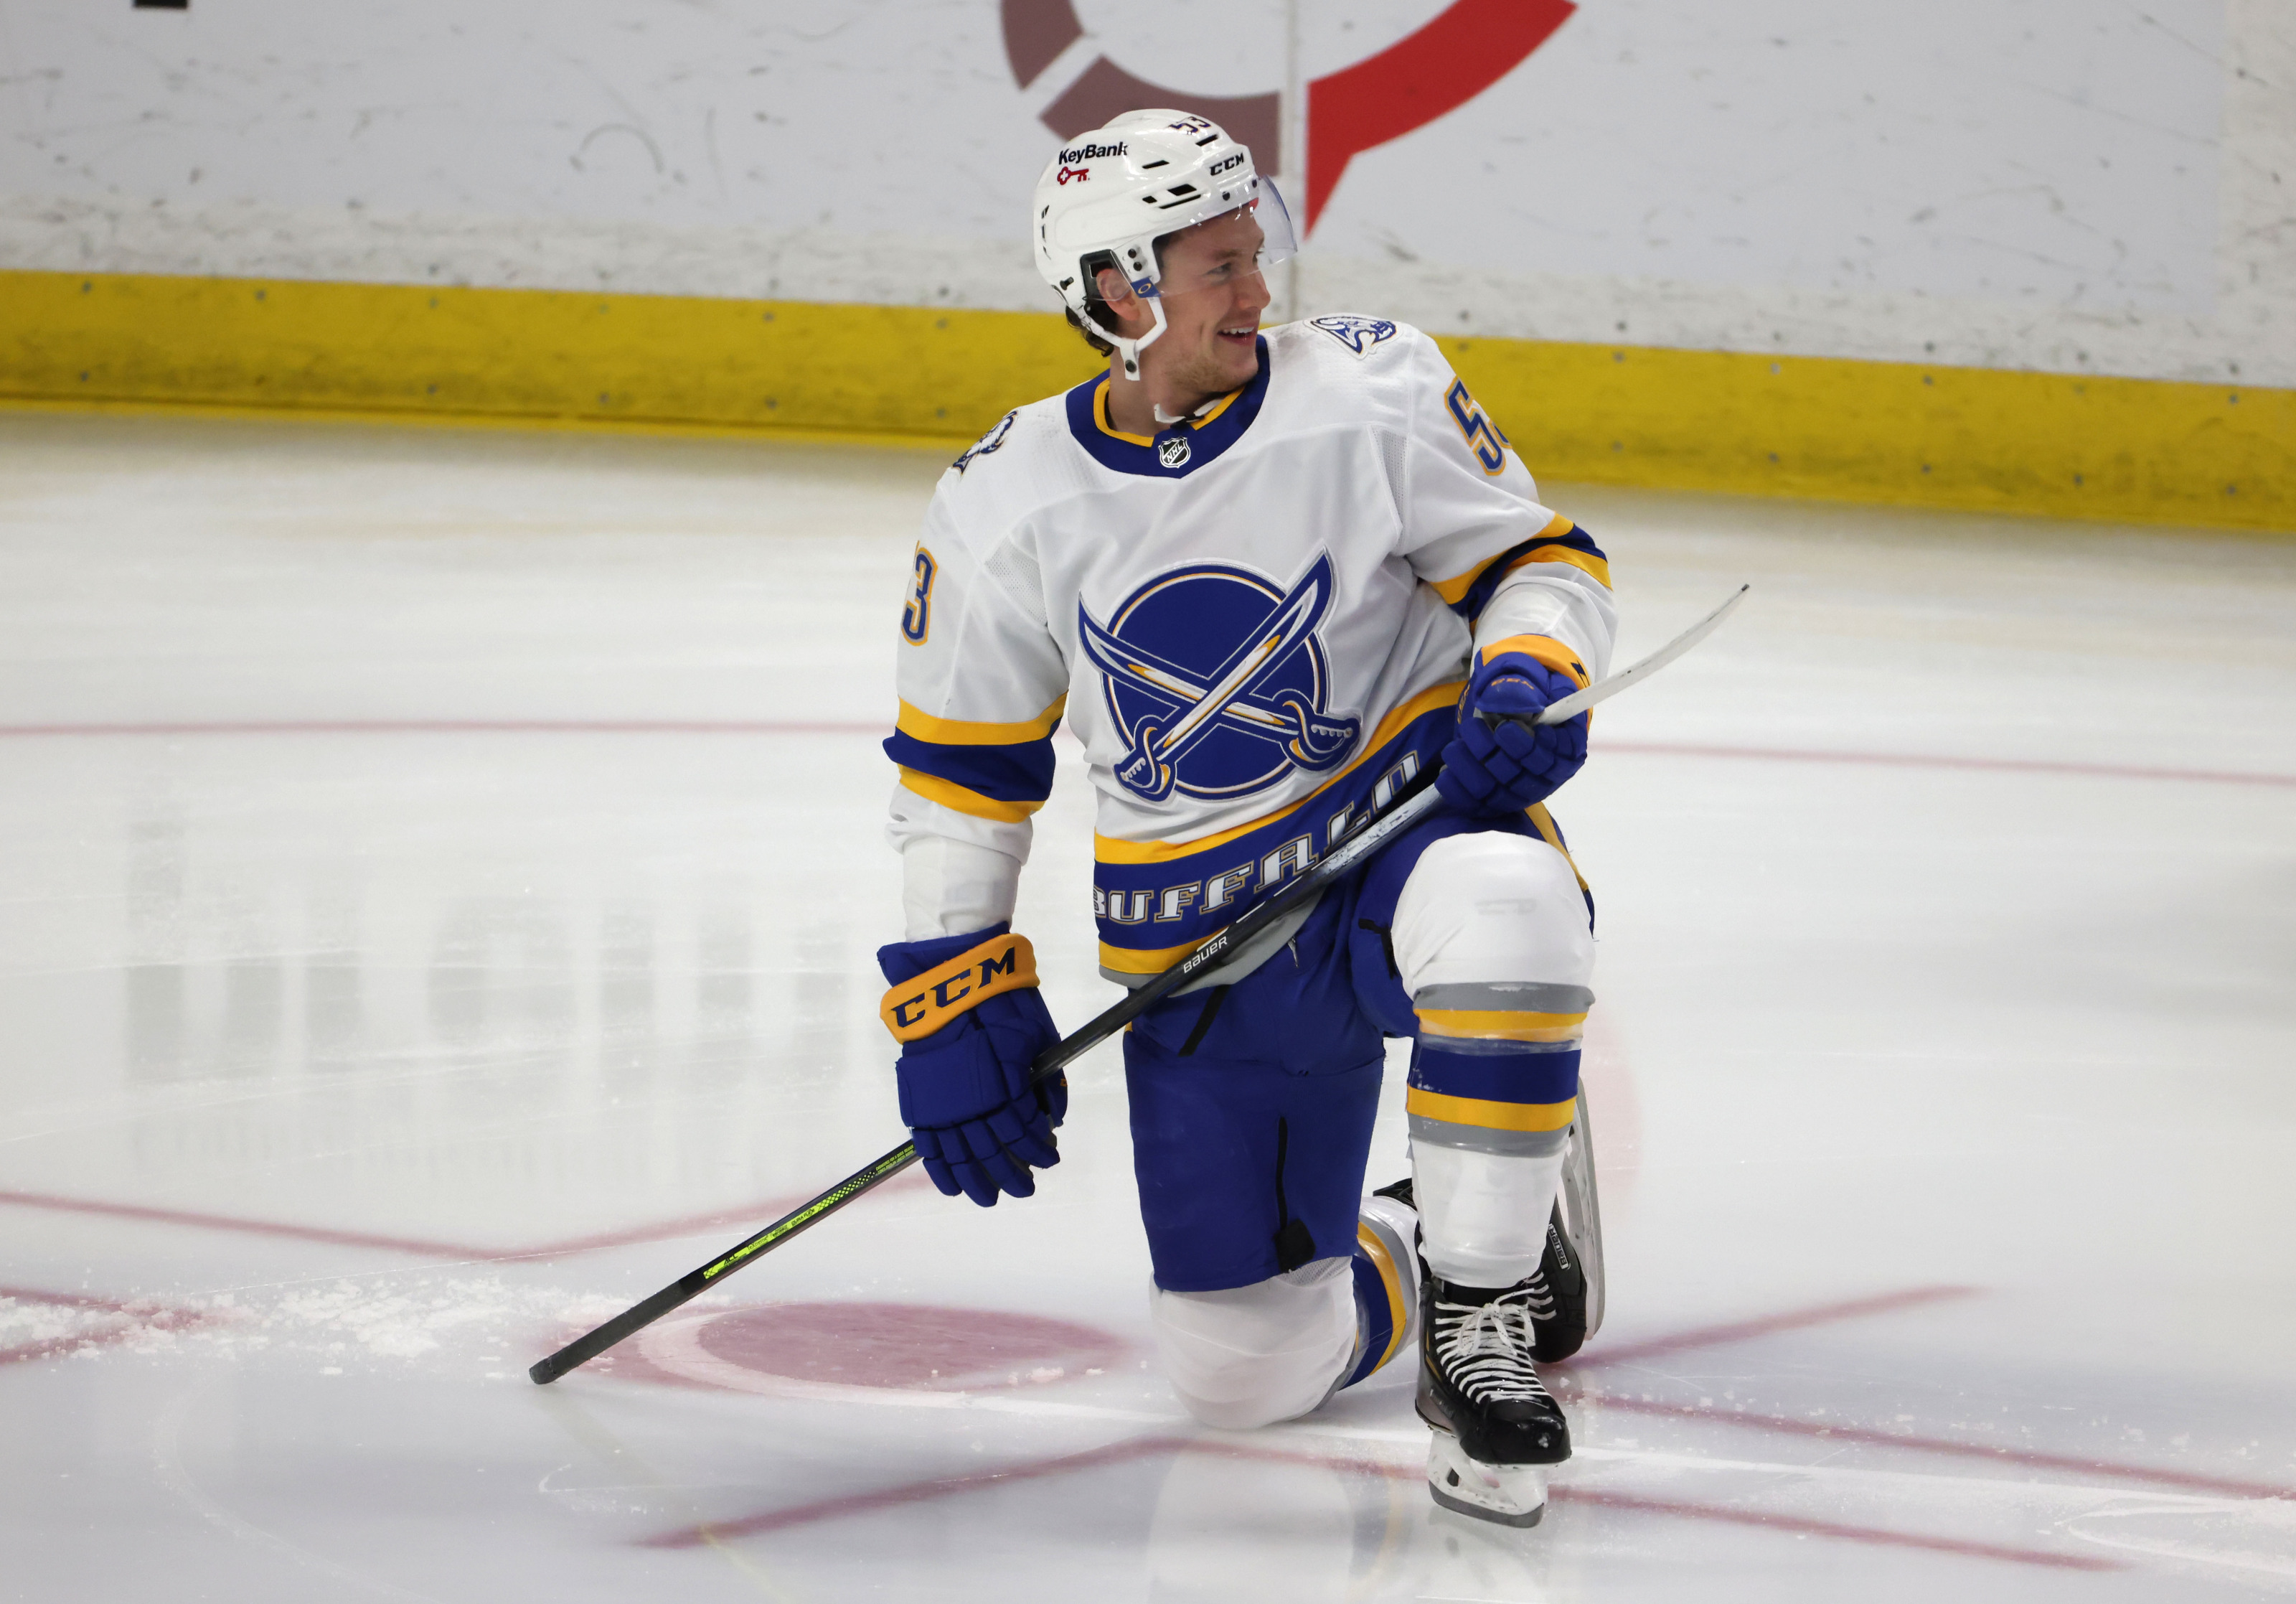 Jeff Skinner says he doesn't want to be traded by Sabres after